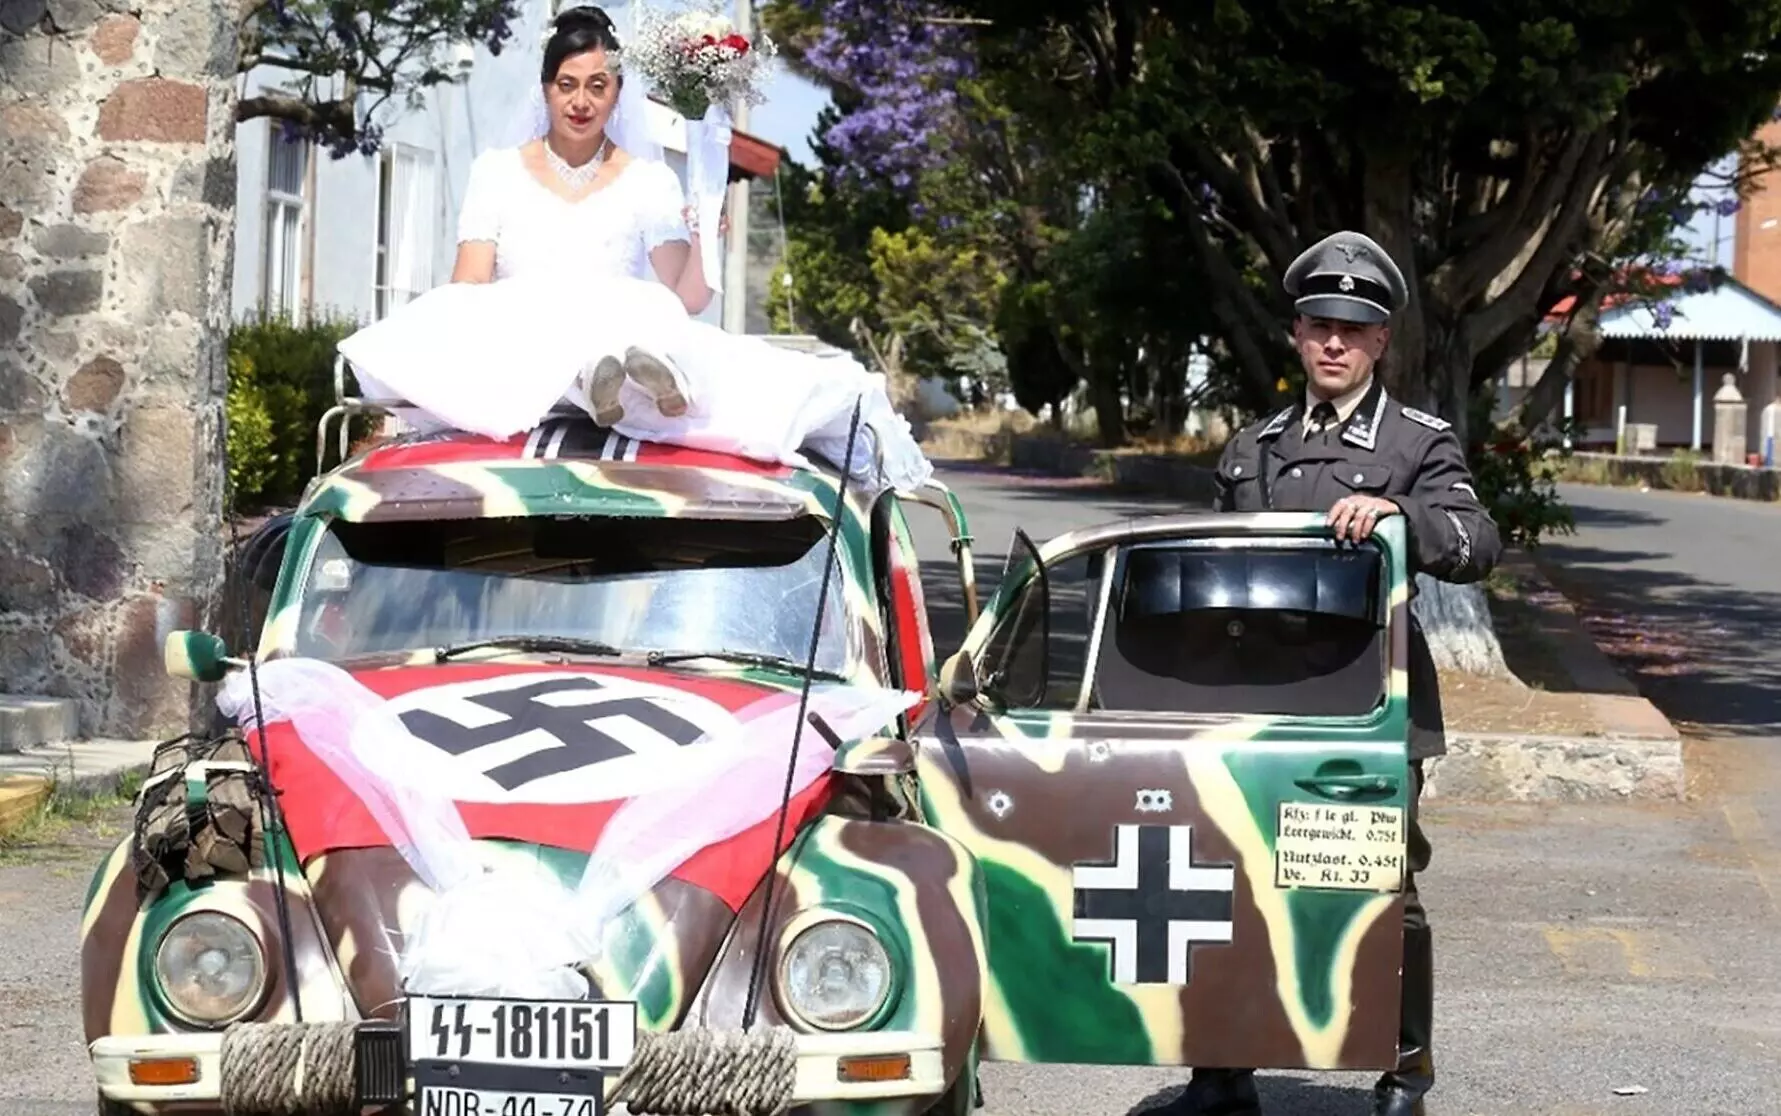 mexican couple got married nazi themed wedding on adolf hitler anniversary